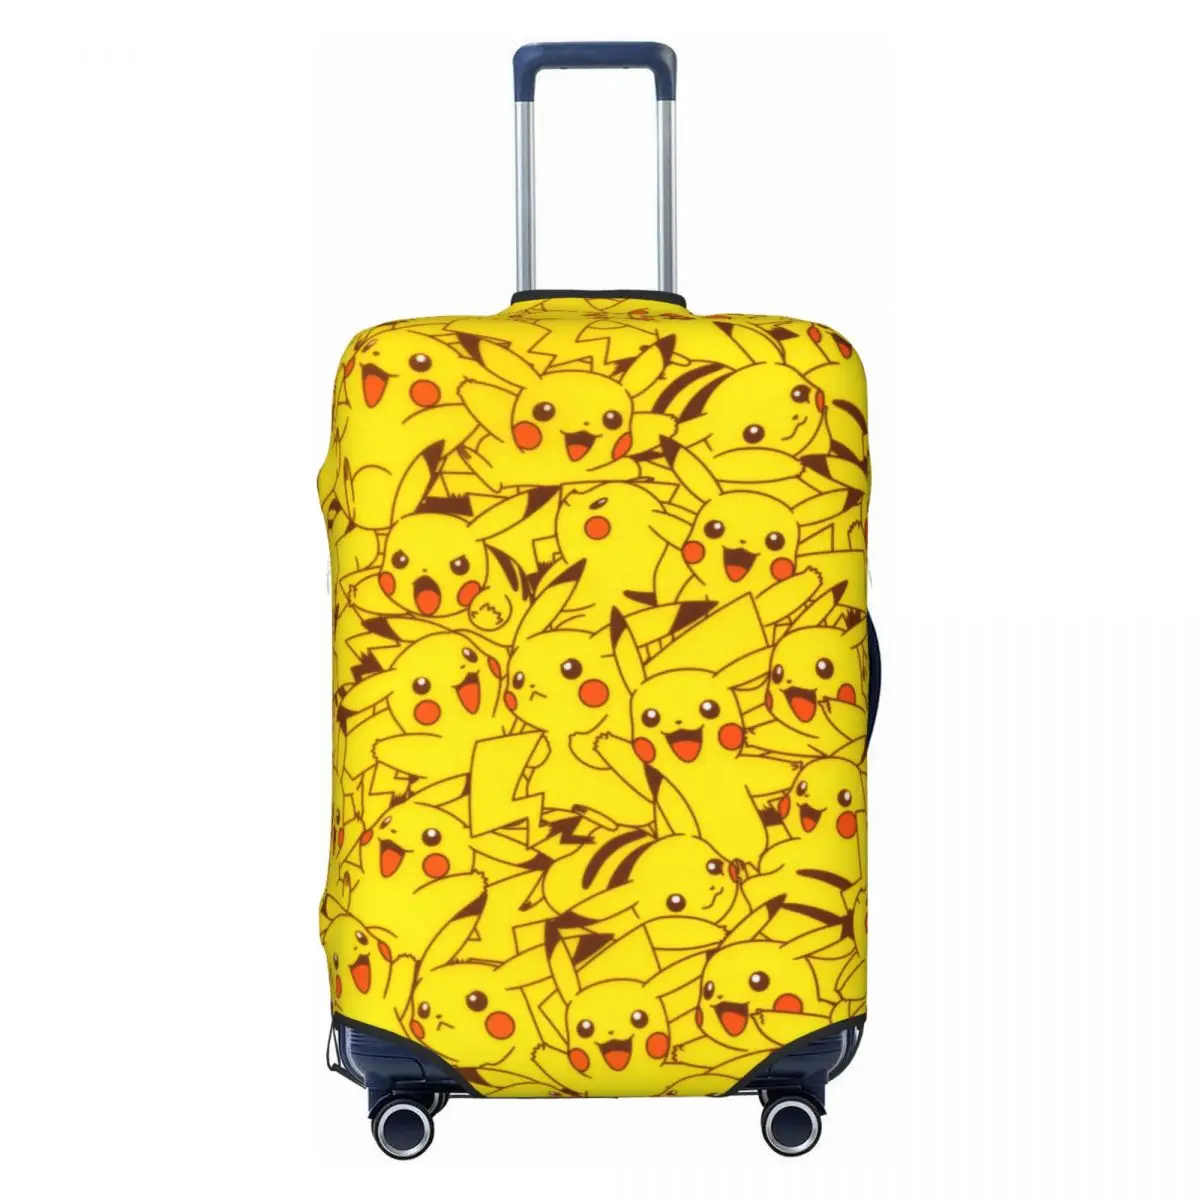 

Custom Pokemon Pikachu Travel Luggage Cover Washable Suitcase Cover Protector Fit 18-32 Inch